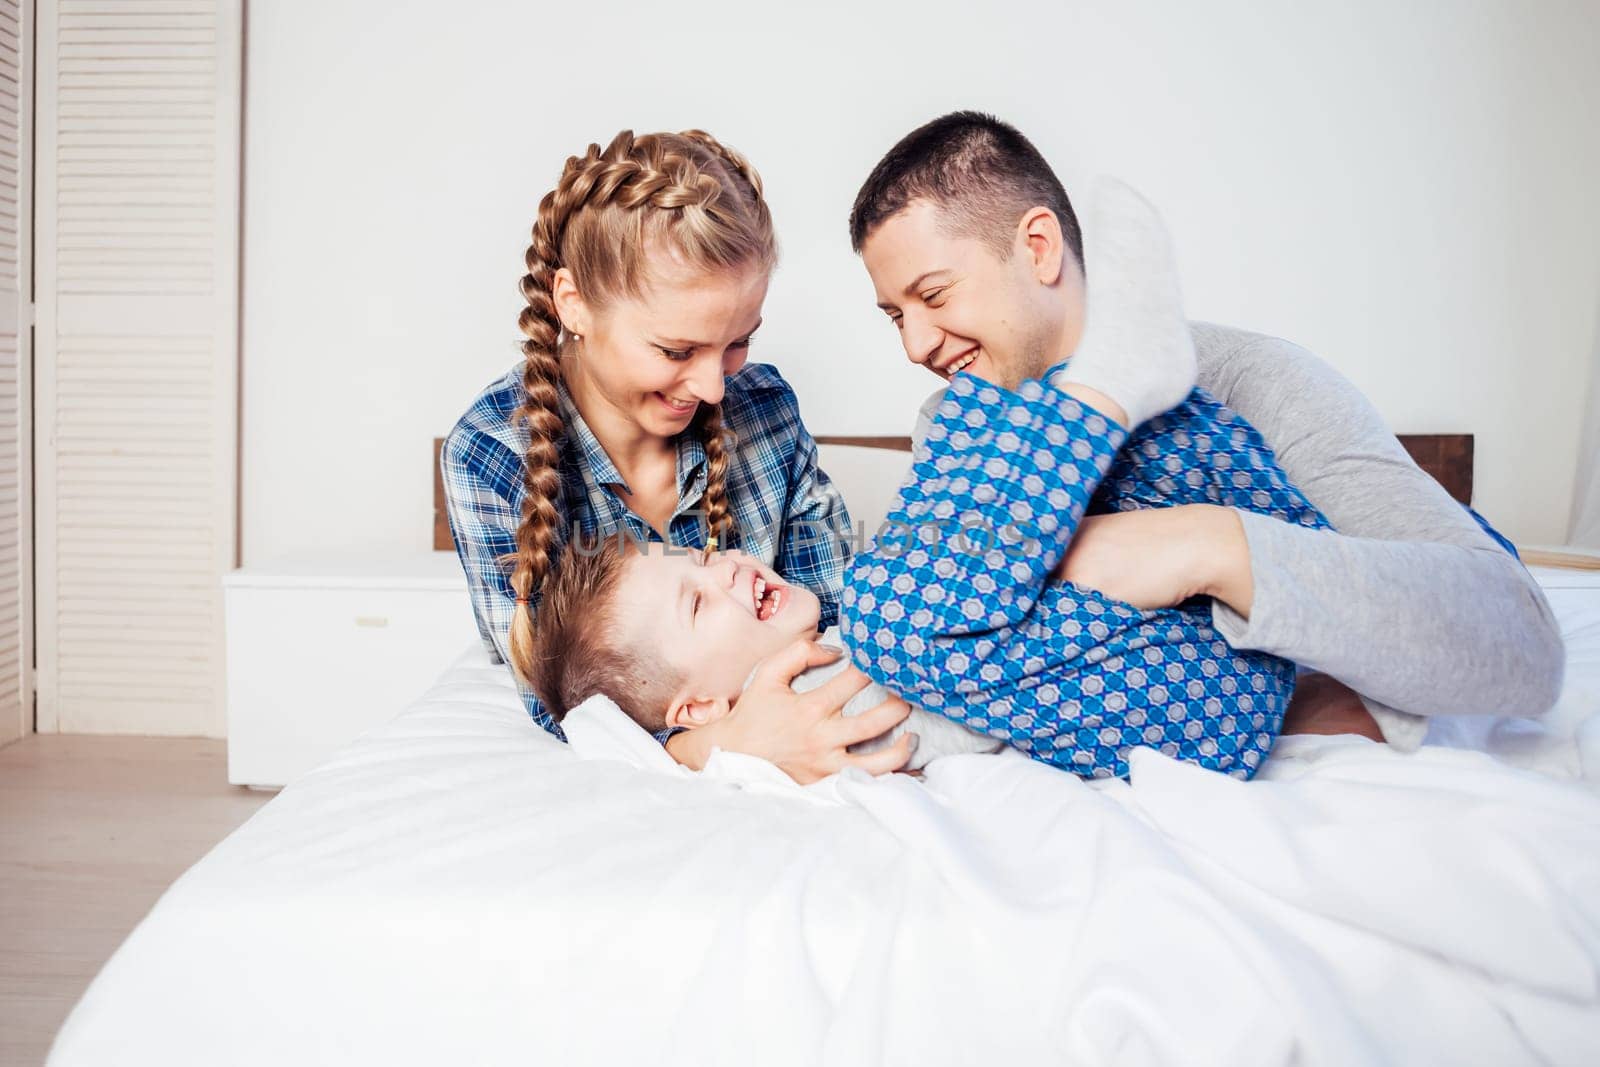 mom dad and son lie on the bed at home dream by Simakov